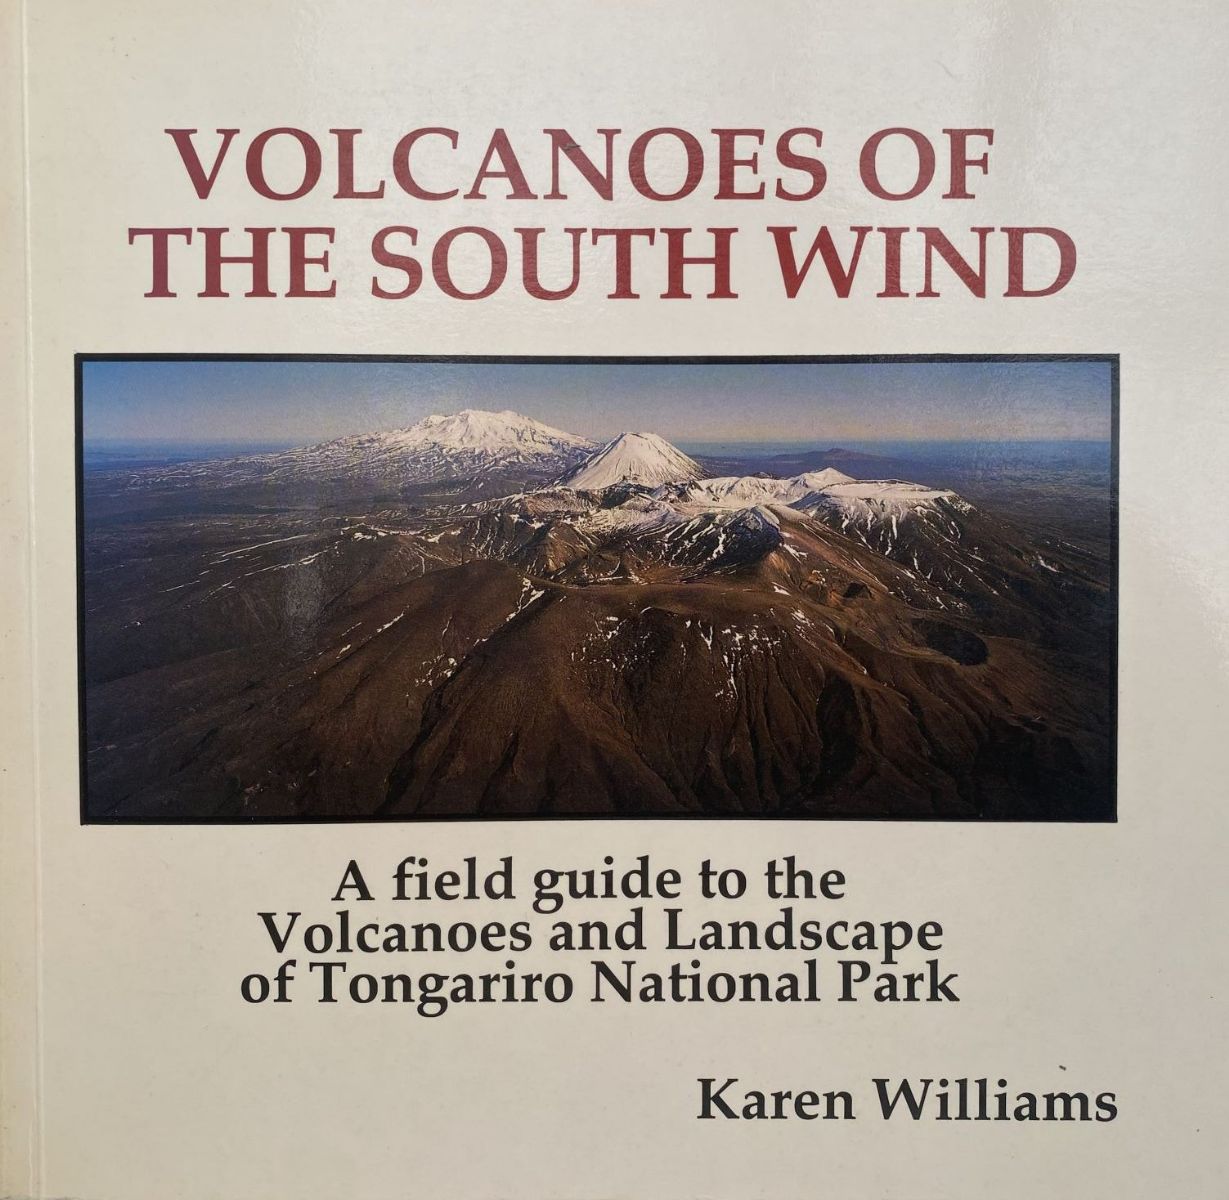 VOLCANOES OF THE SOUTH WIND: A Field Guide To Tongariro National Park